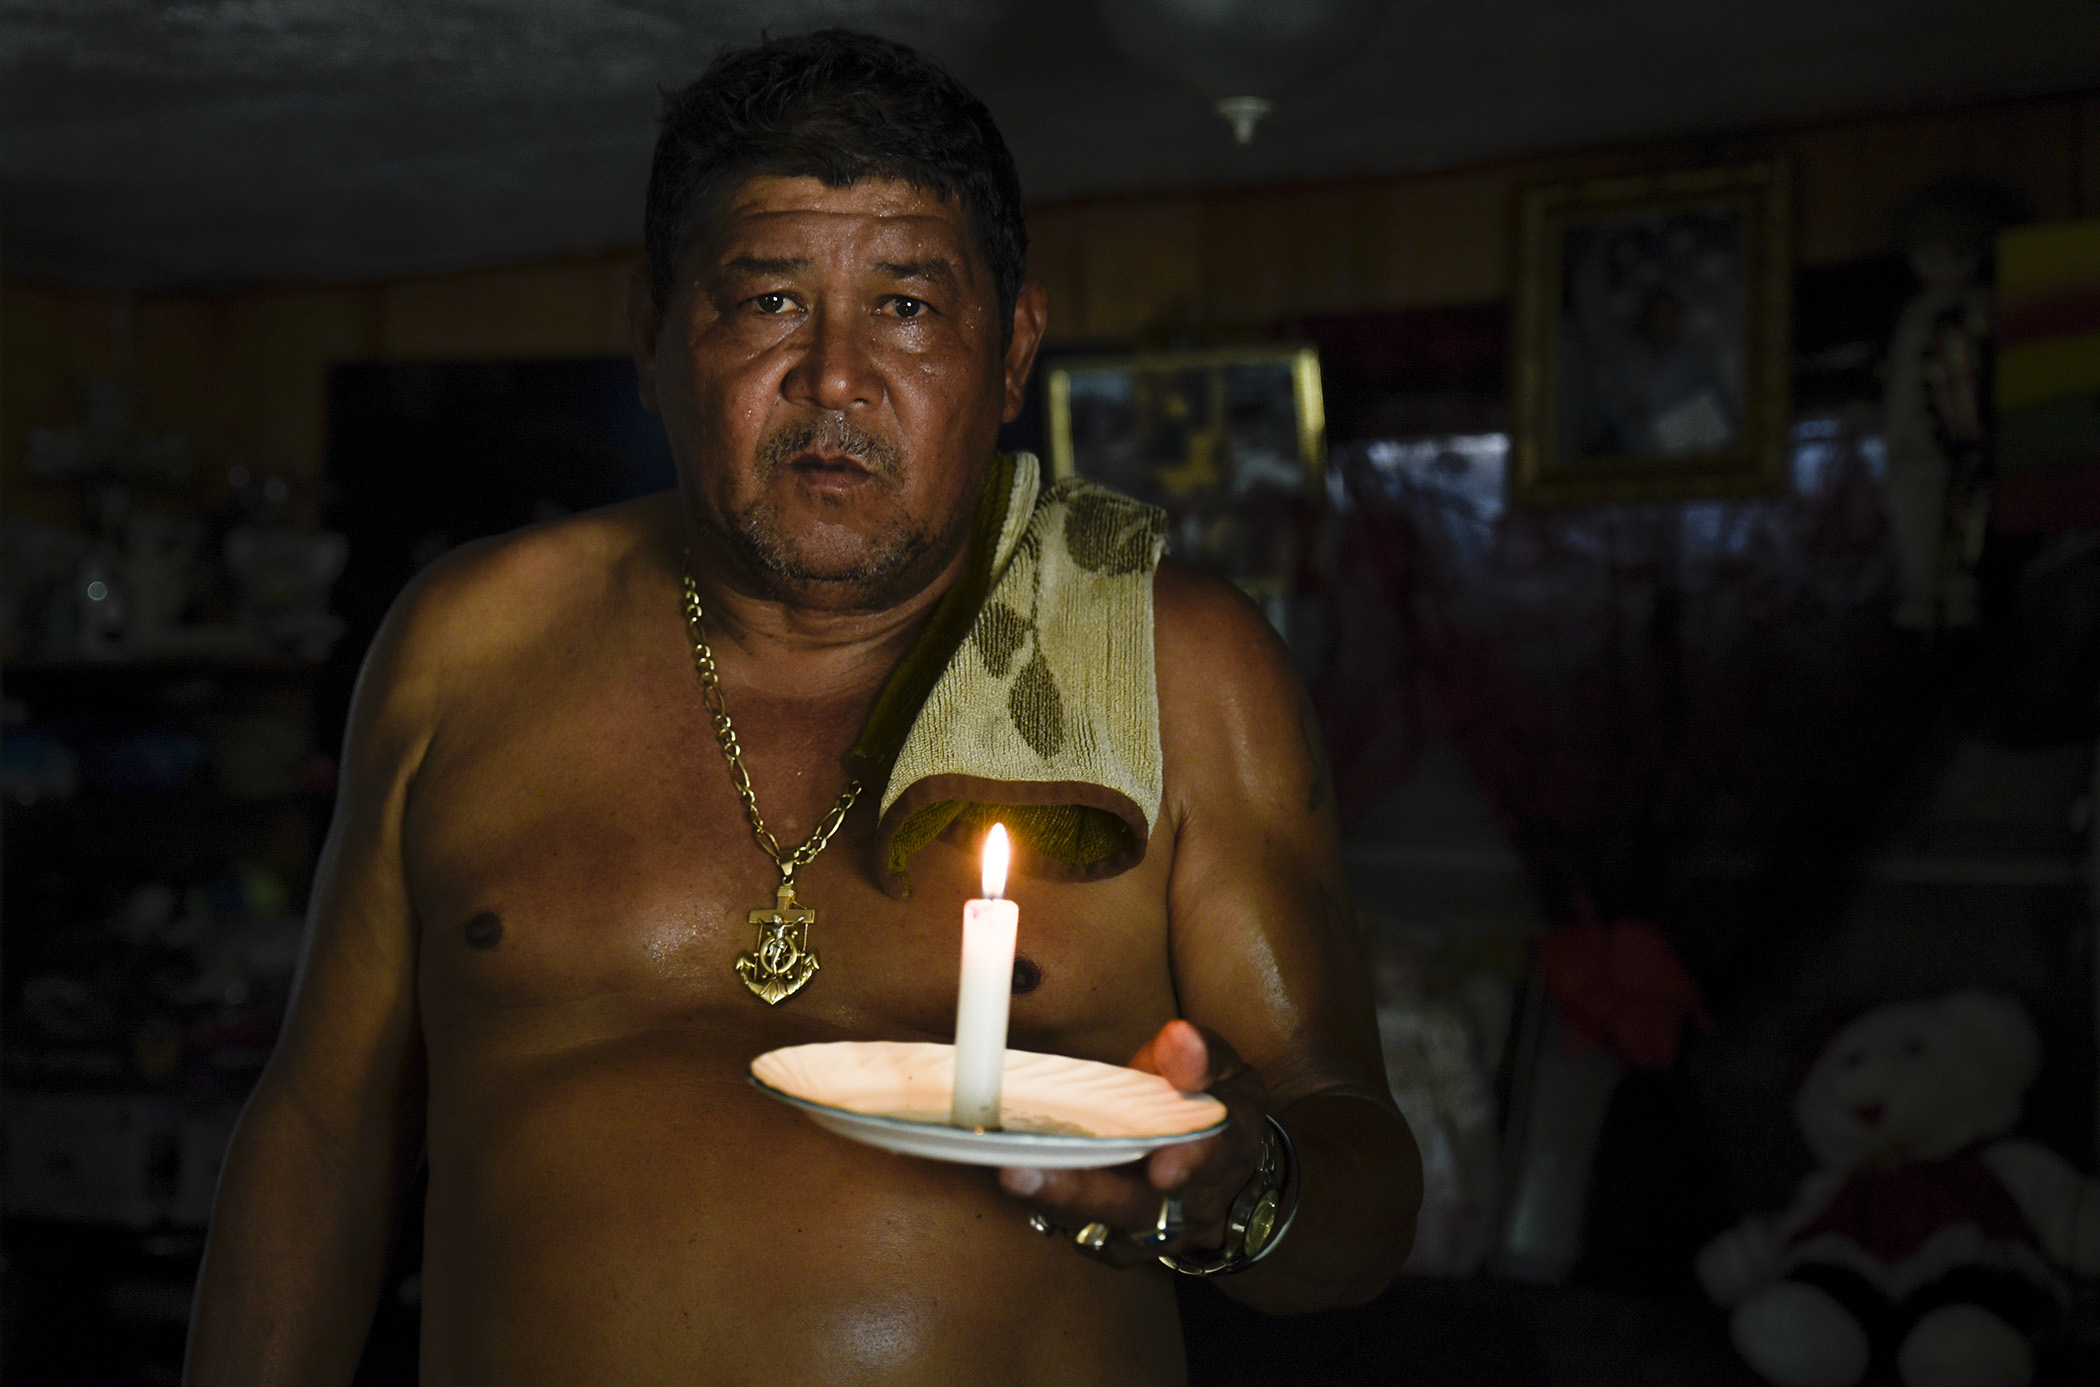  Fifty-nine-year-old Lake Worth resident Mario Velasquez stands for a portrait holding a candle, his main source of light at night, inside his Orange Grove Mobile Home Park residence in Lake Worth, FL. Velasquez said the neighborhood had been without